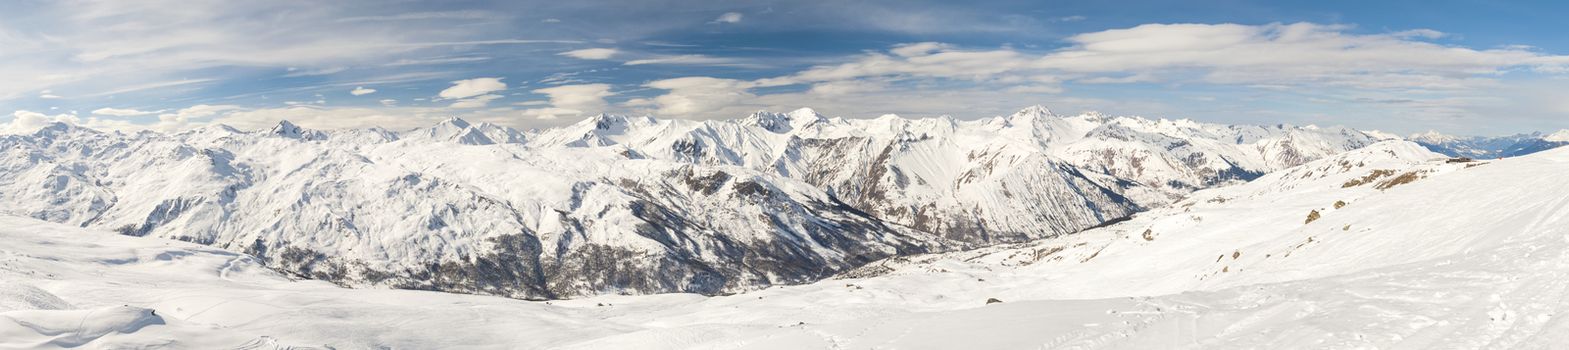 Panoramic view down a snowy mountain range valley in winter